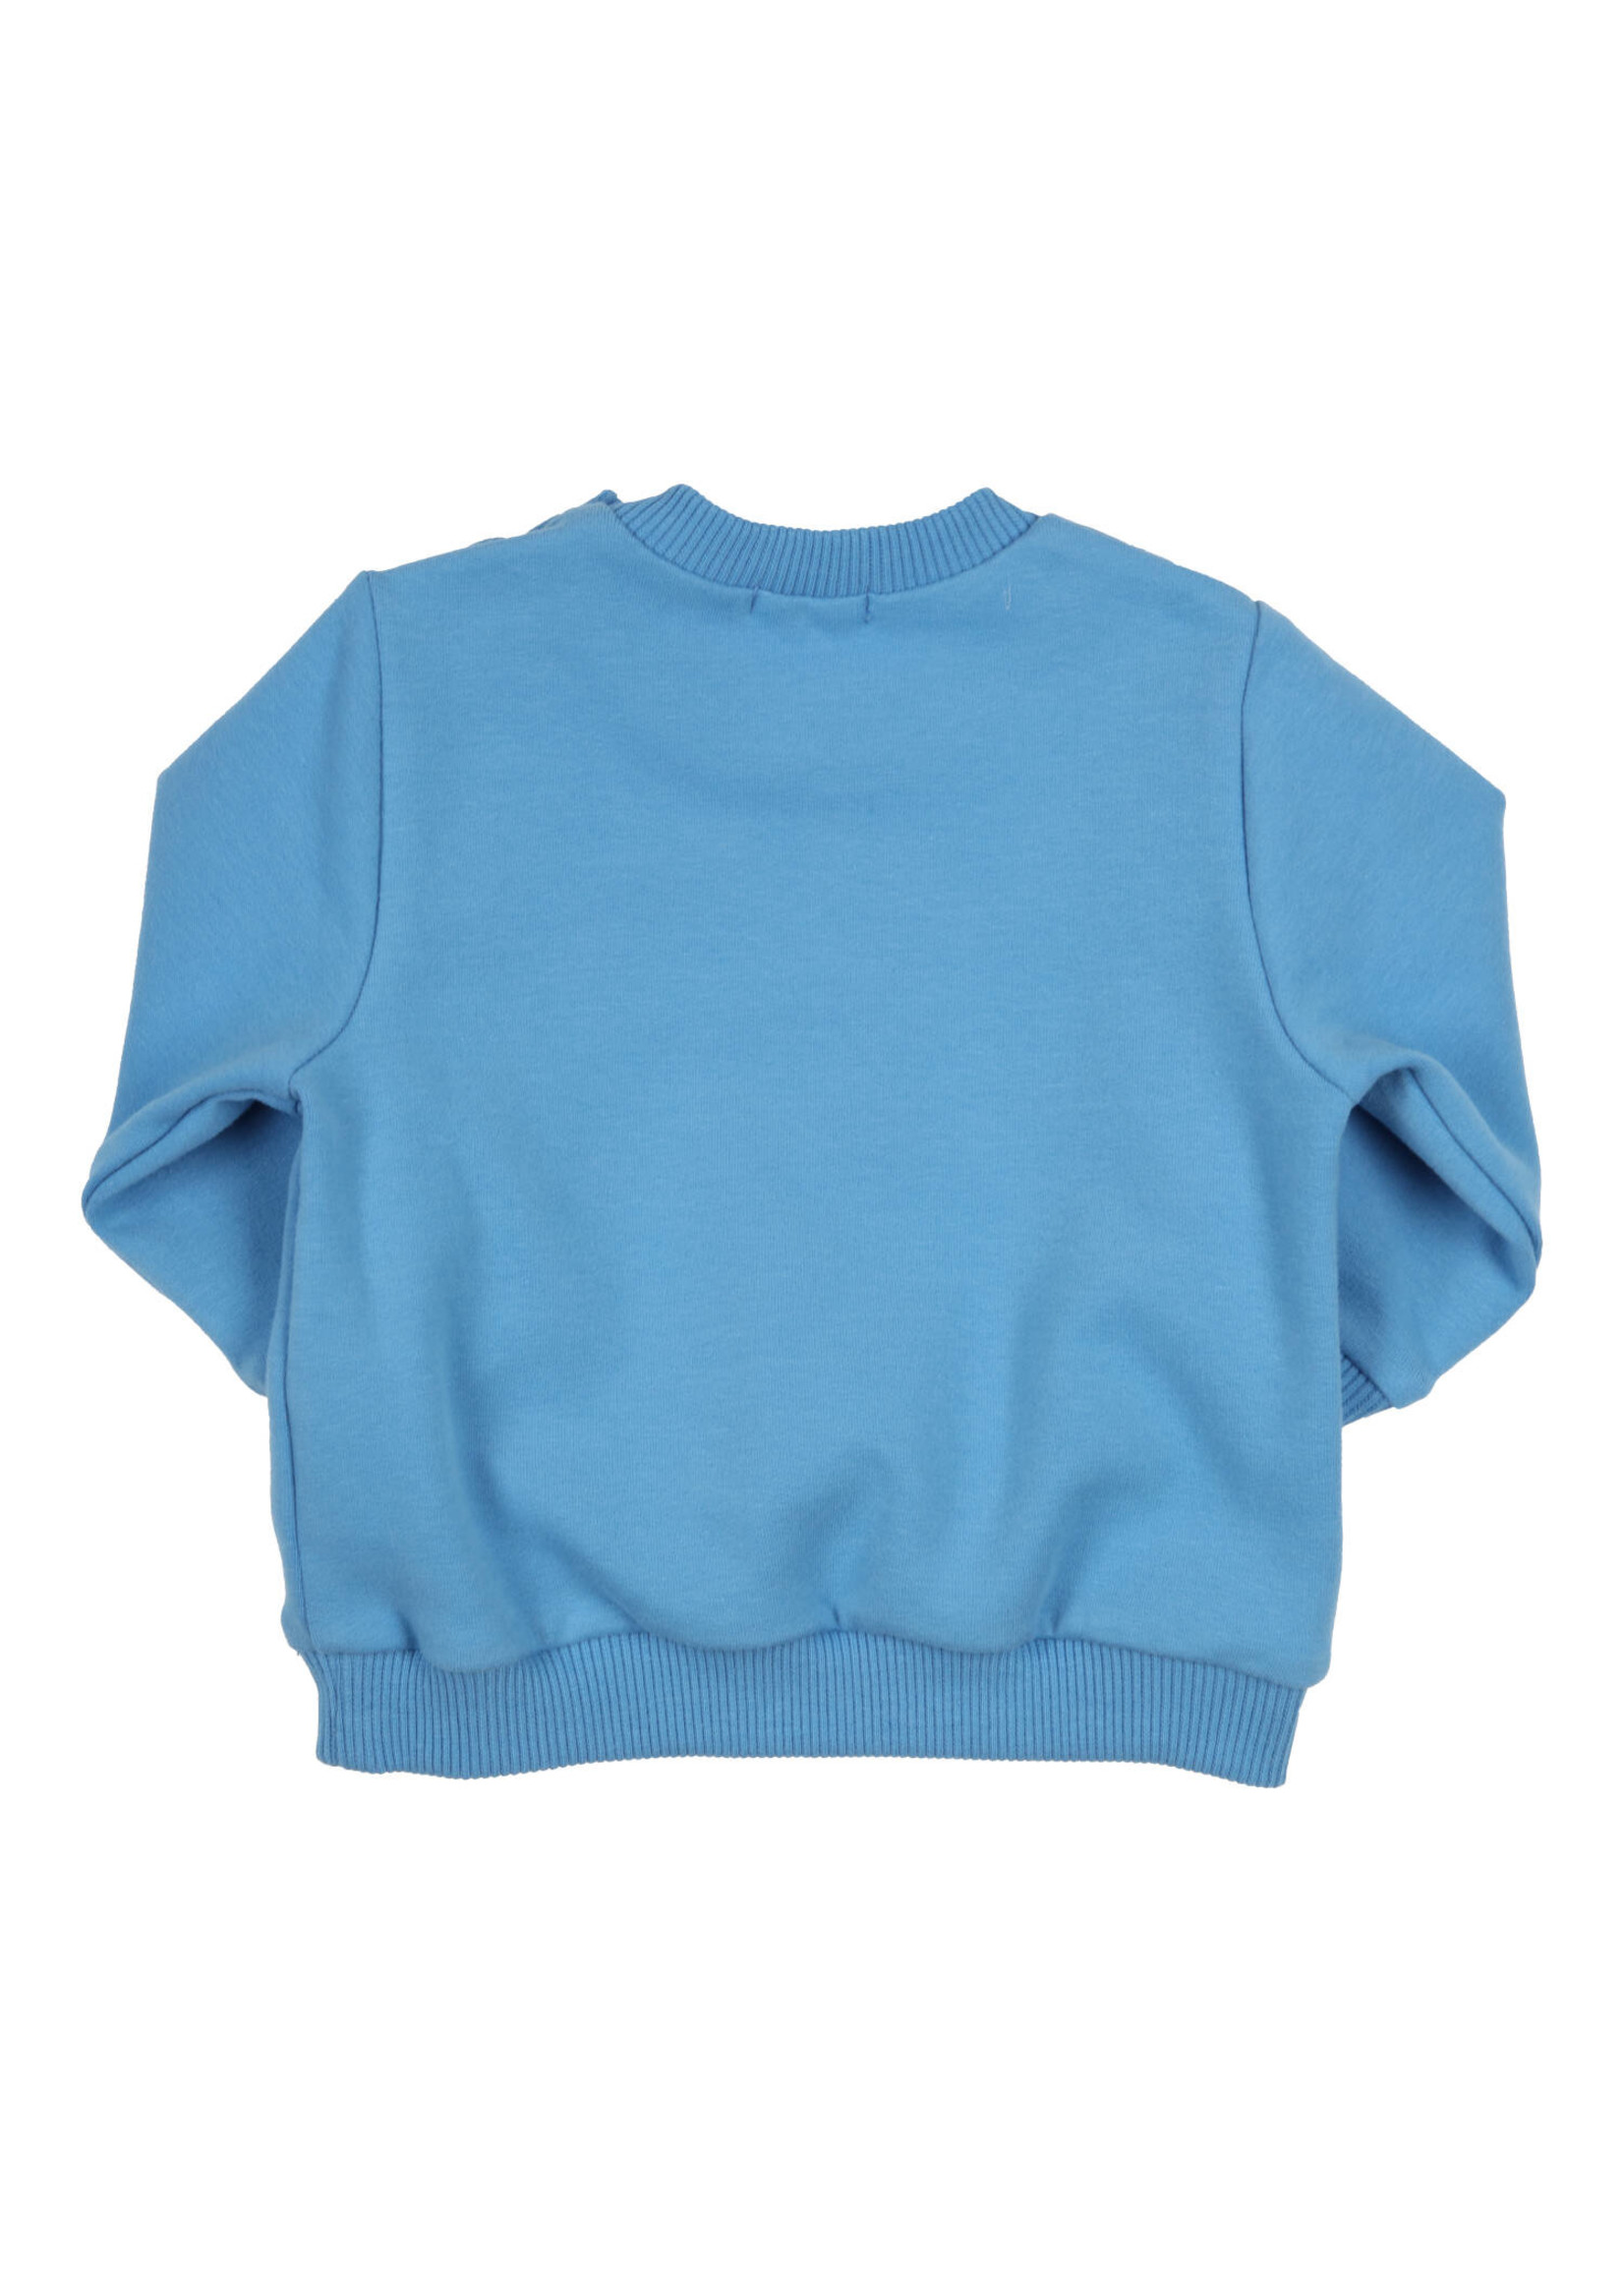 Gymp Sweater Carbon Blue 352-3366-20